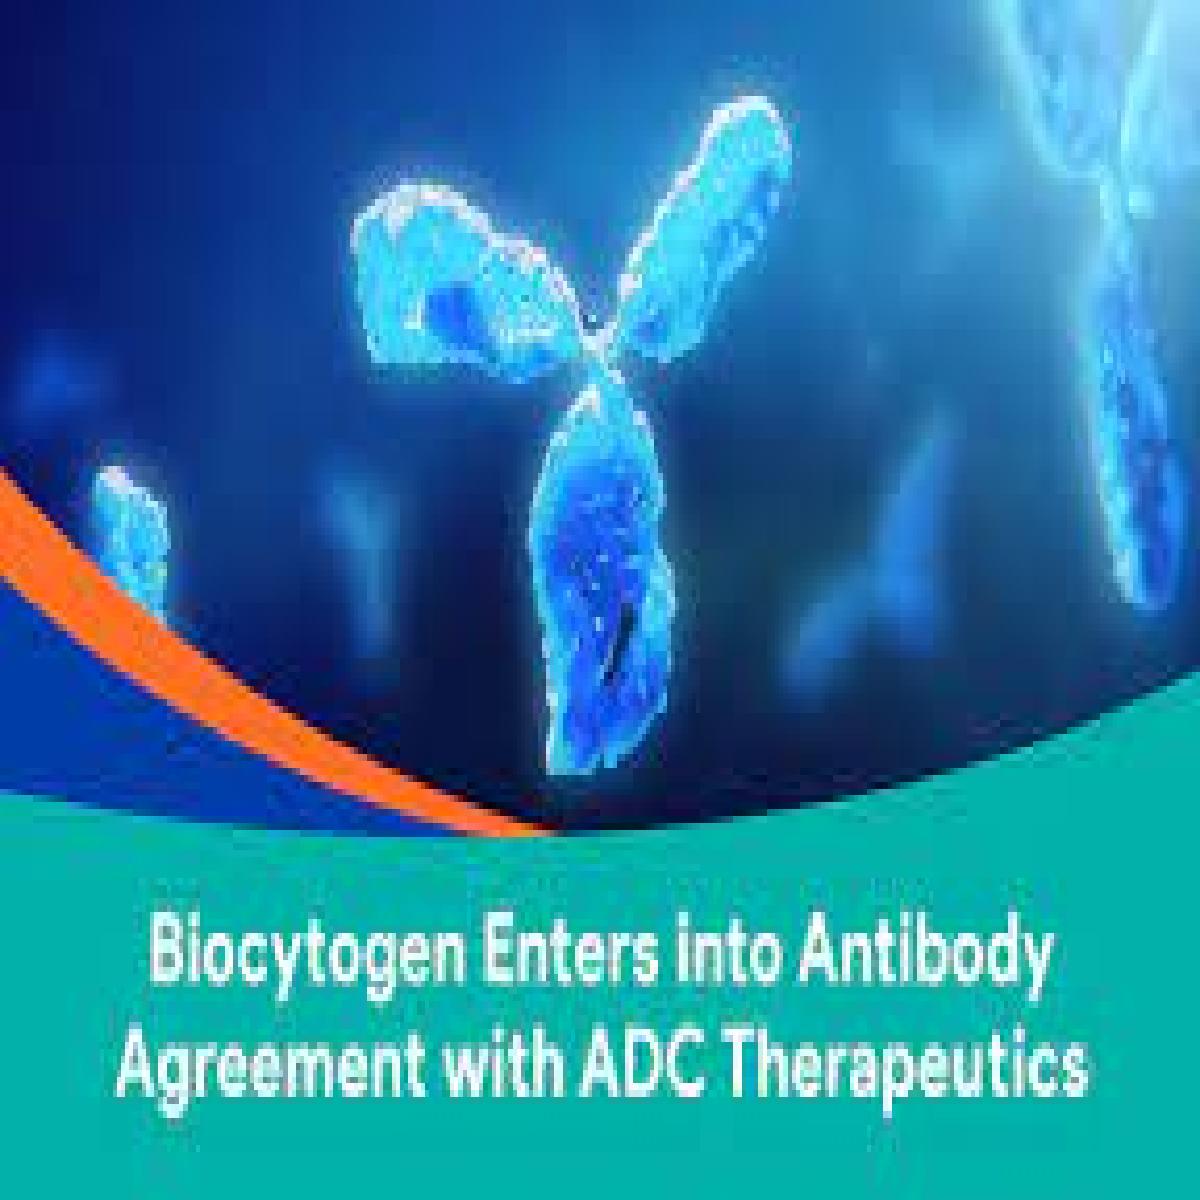 Biocytogen Announces FDA Clearance of IND Application for Bispecific Antibody YH008